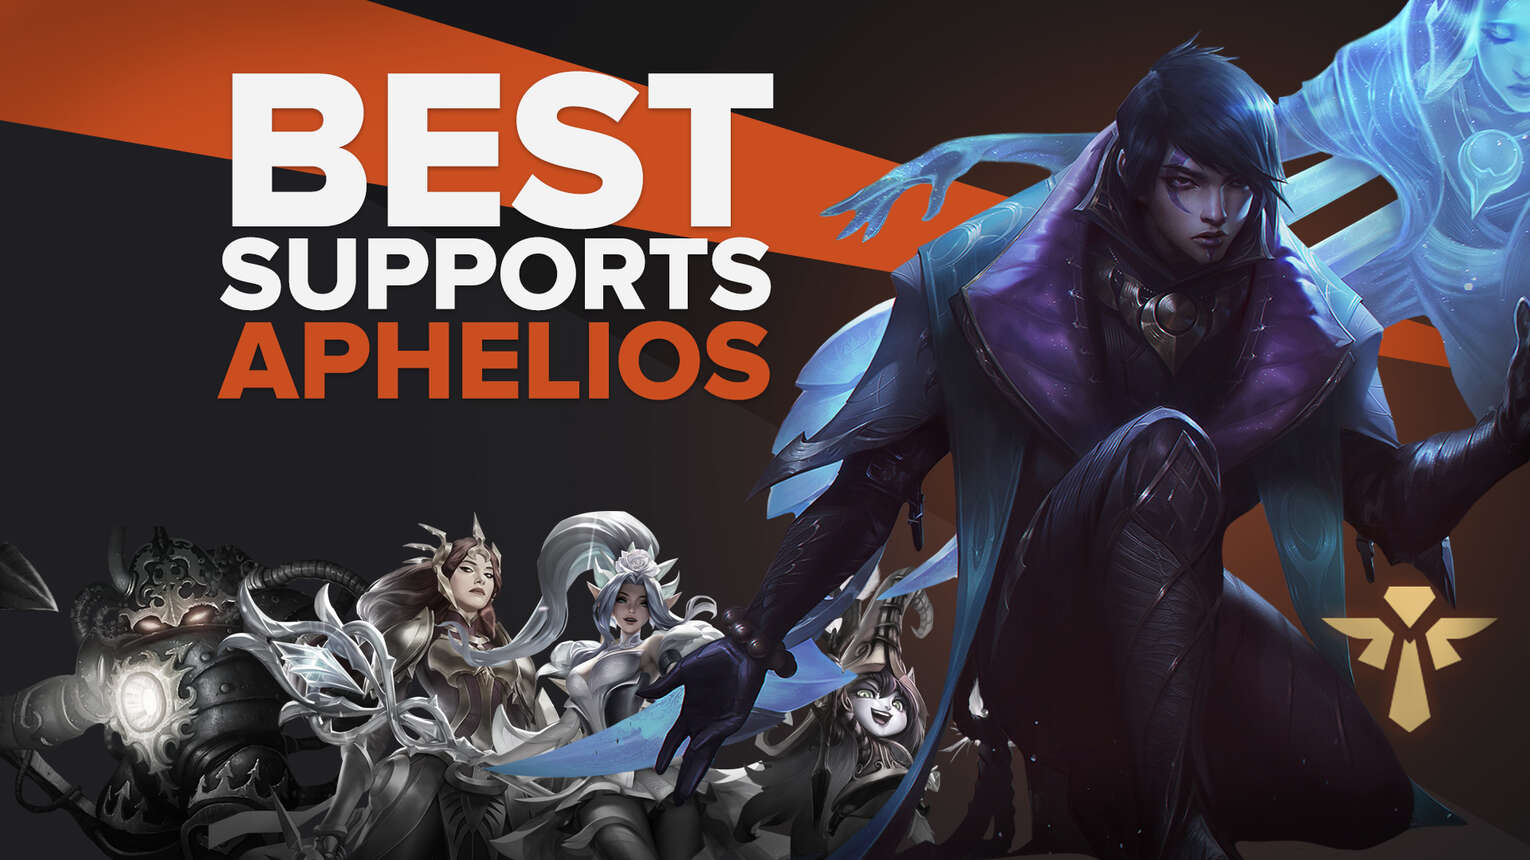 6 Best Support Champions for Aphelios in League of Legends